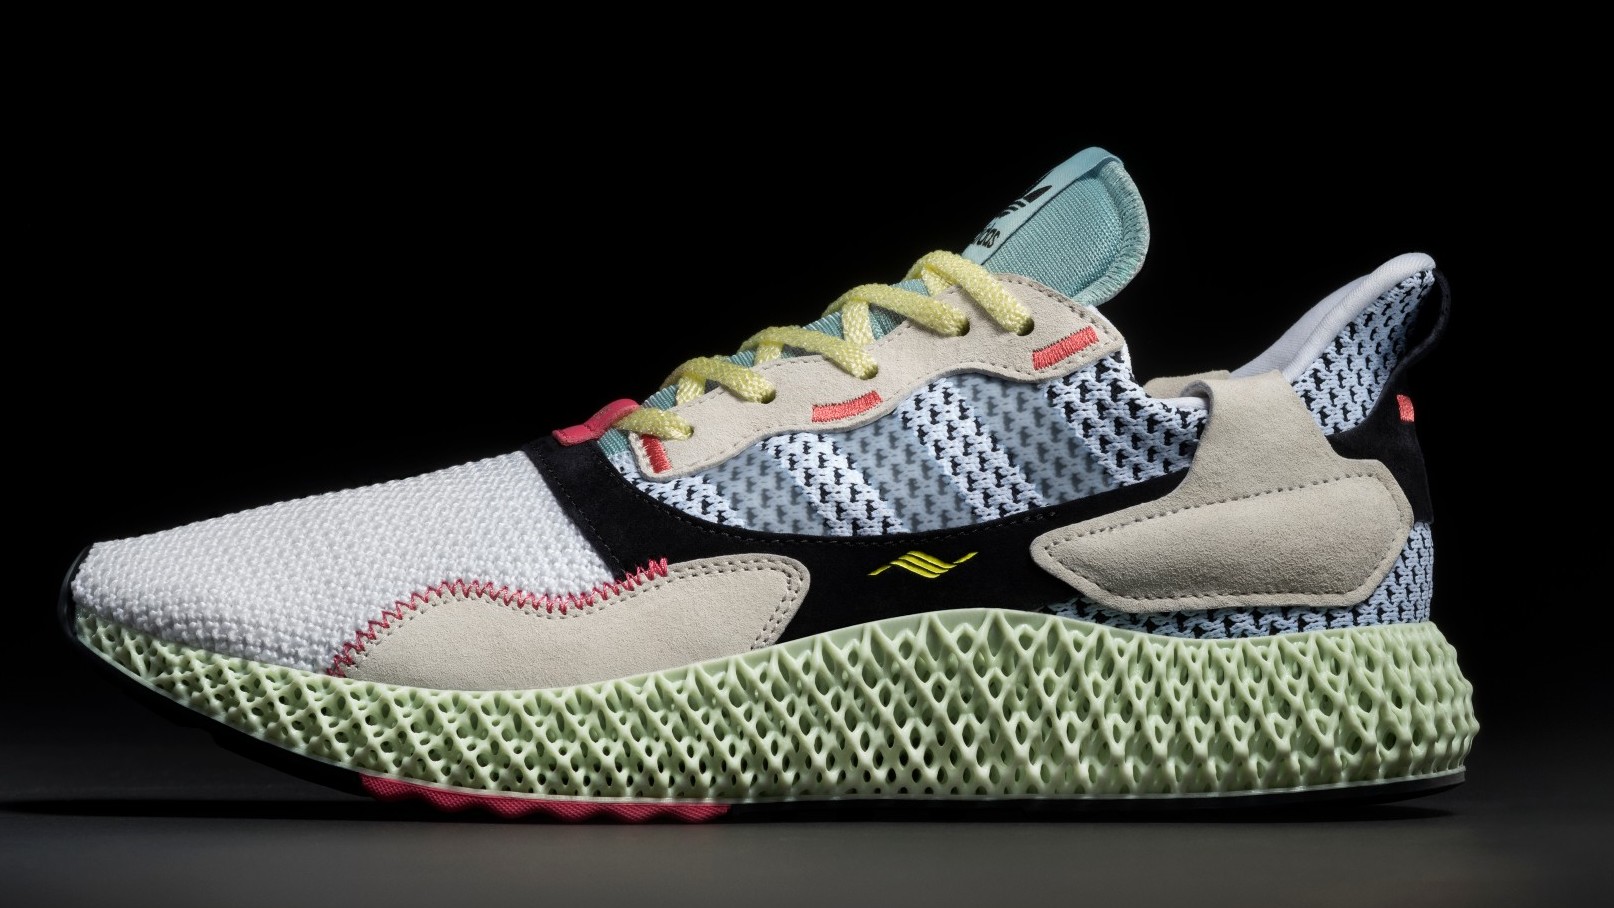 Adidas ZX 4000 4D B42203 (Lateral)